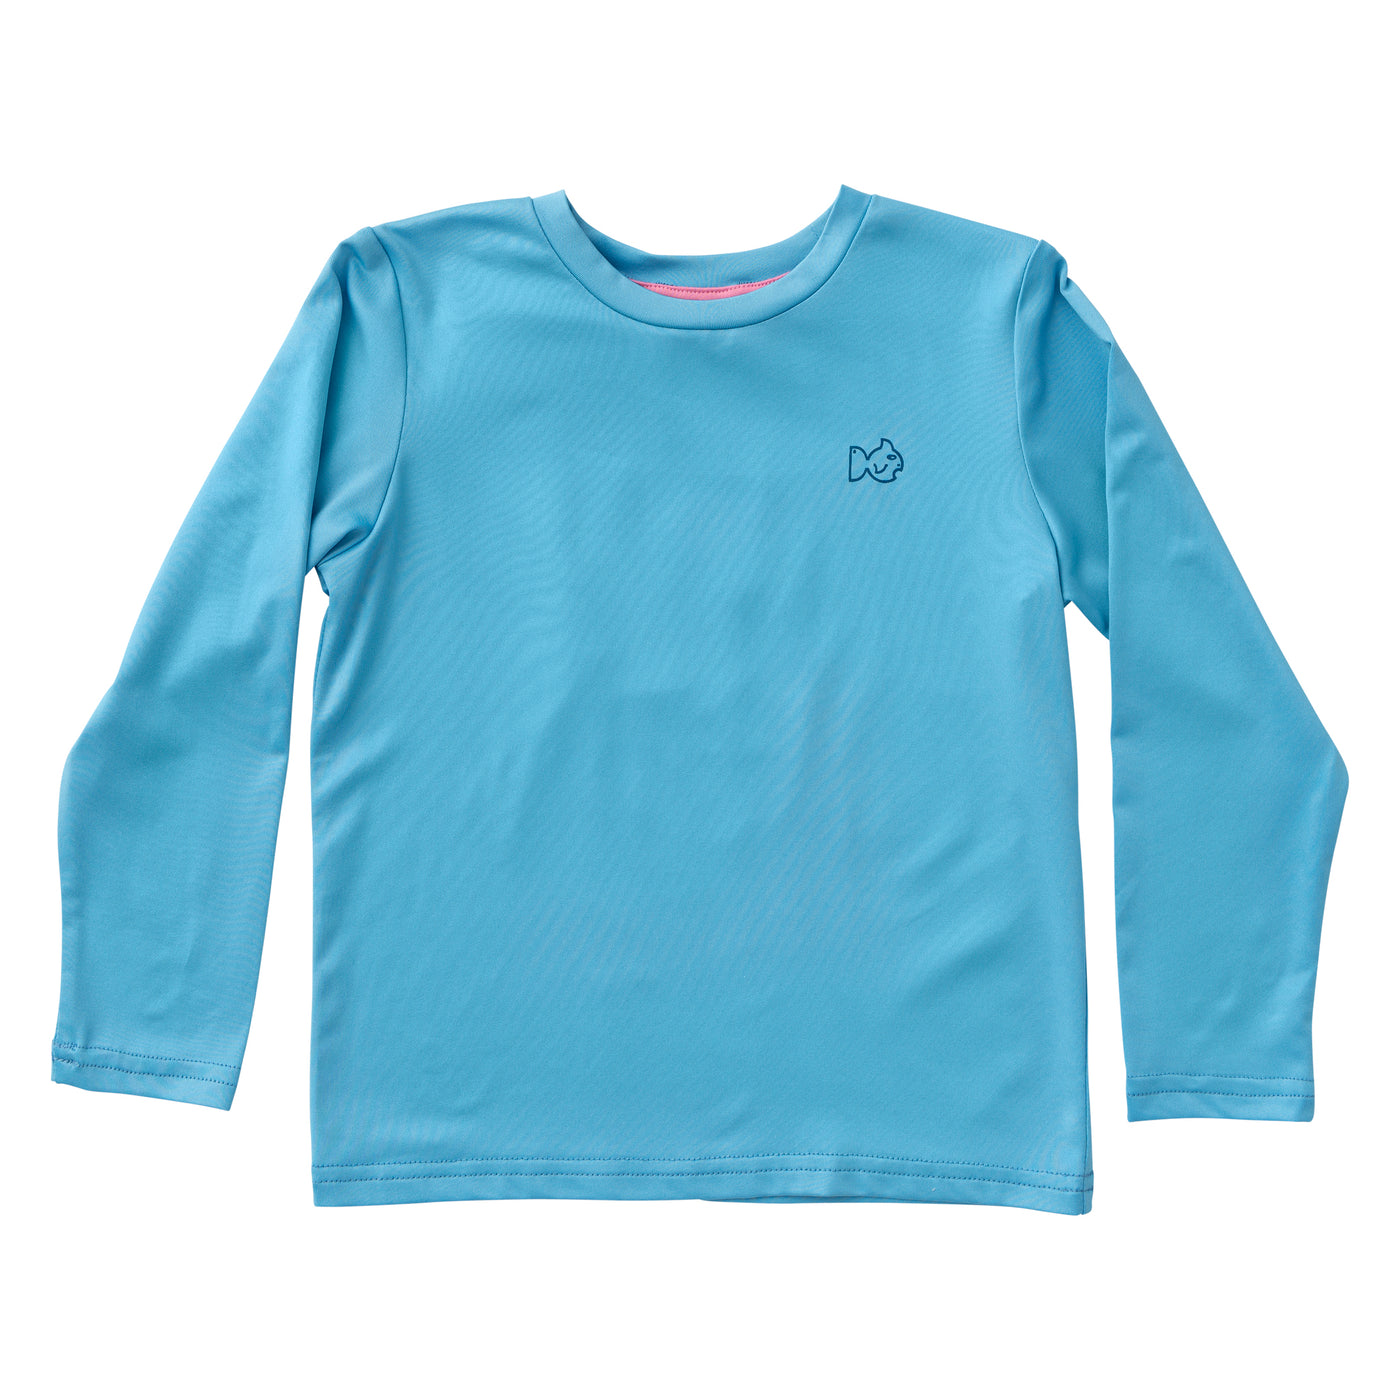 Long Sleeve Pro Performance Tee - Ethereal Blue